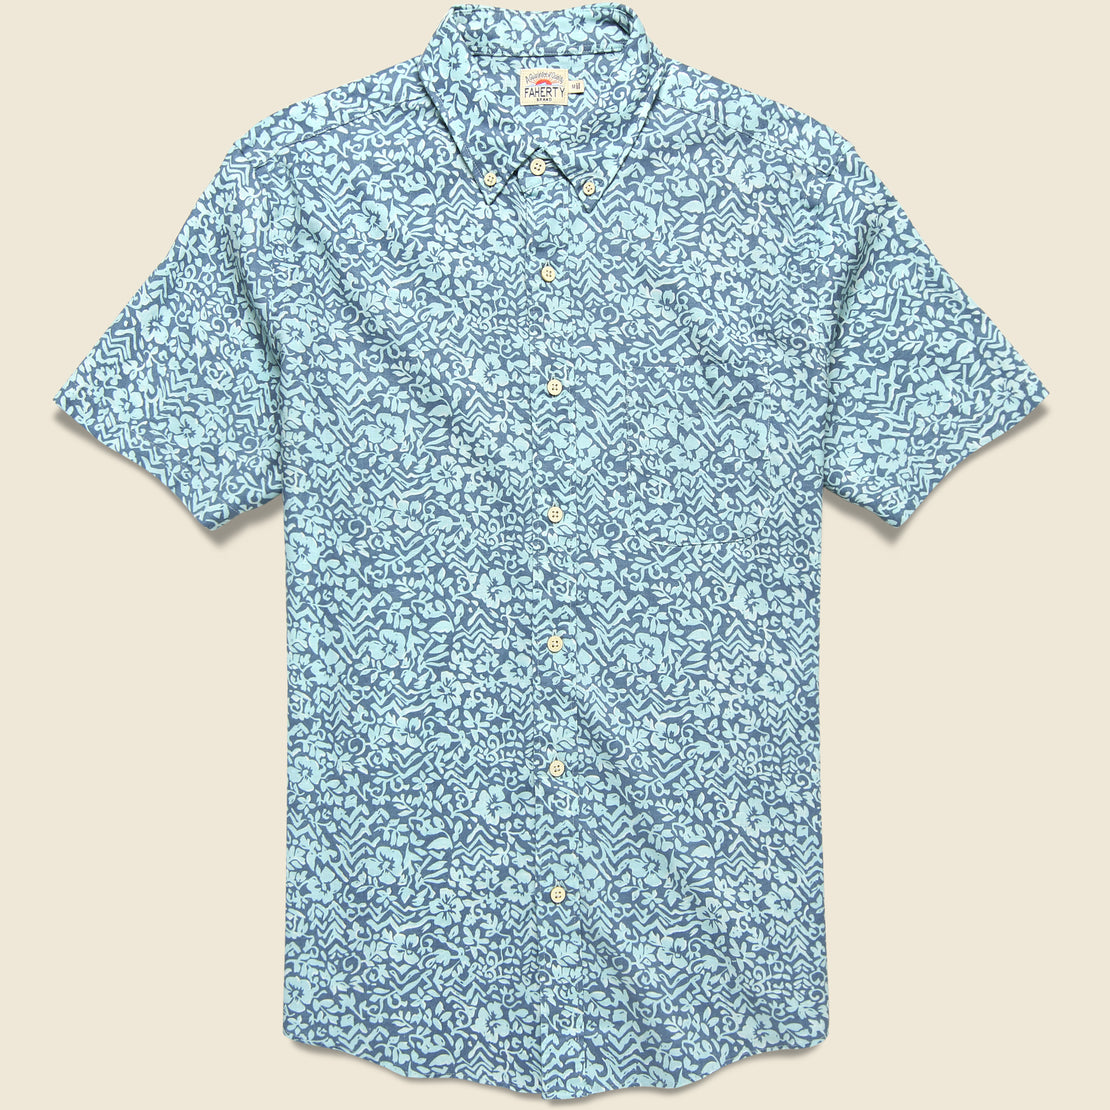 Faherty Breeze Shirt - Teal Waters Hilo